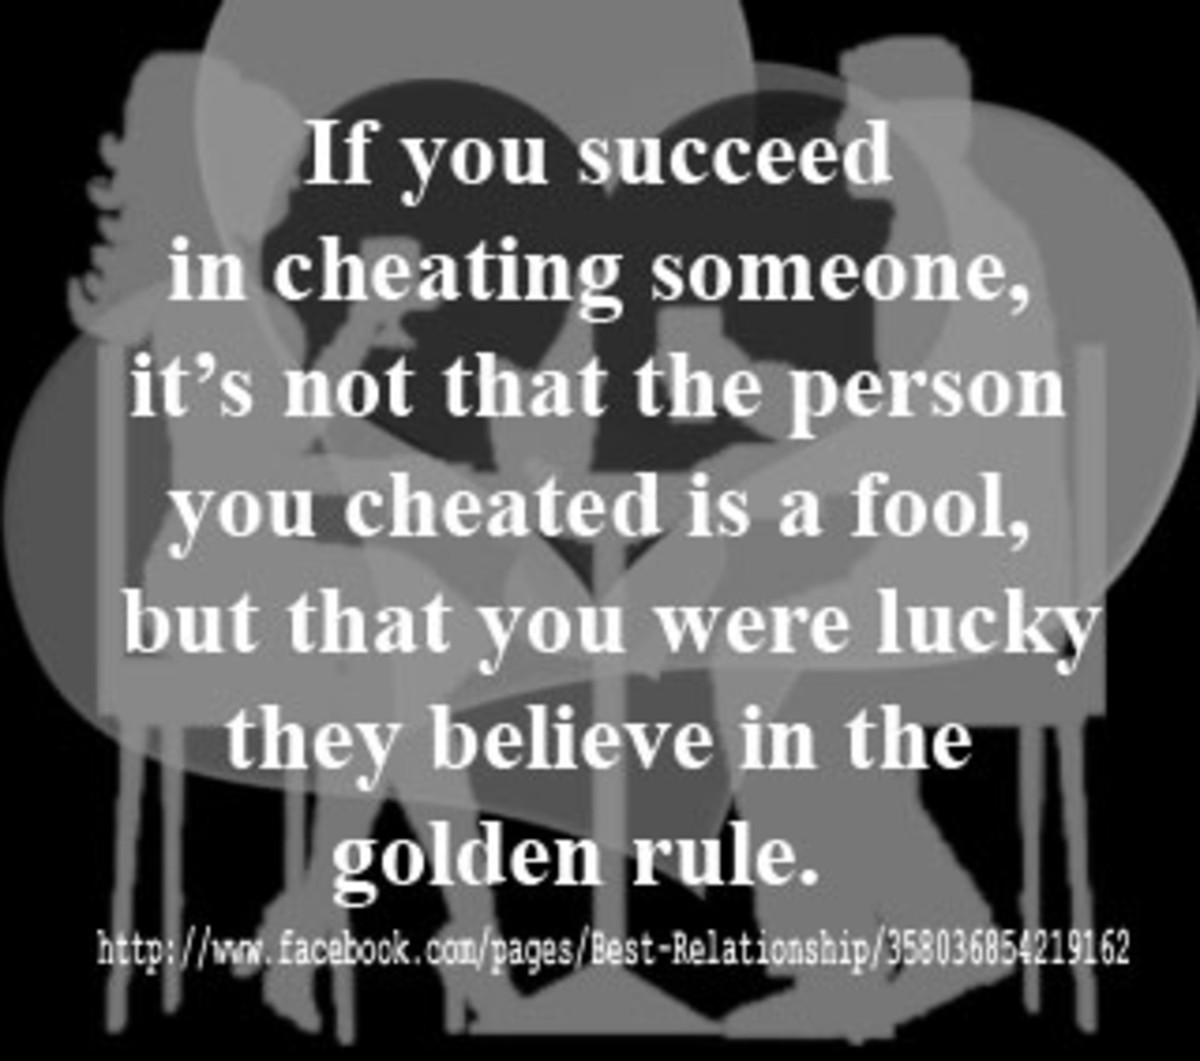 Cheating is breaking the golden rule